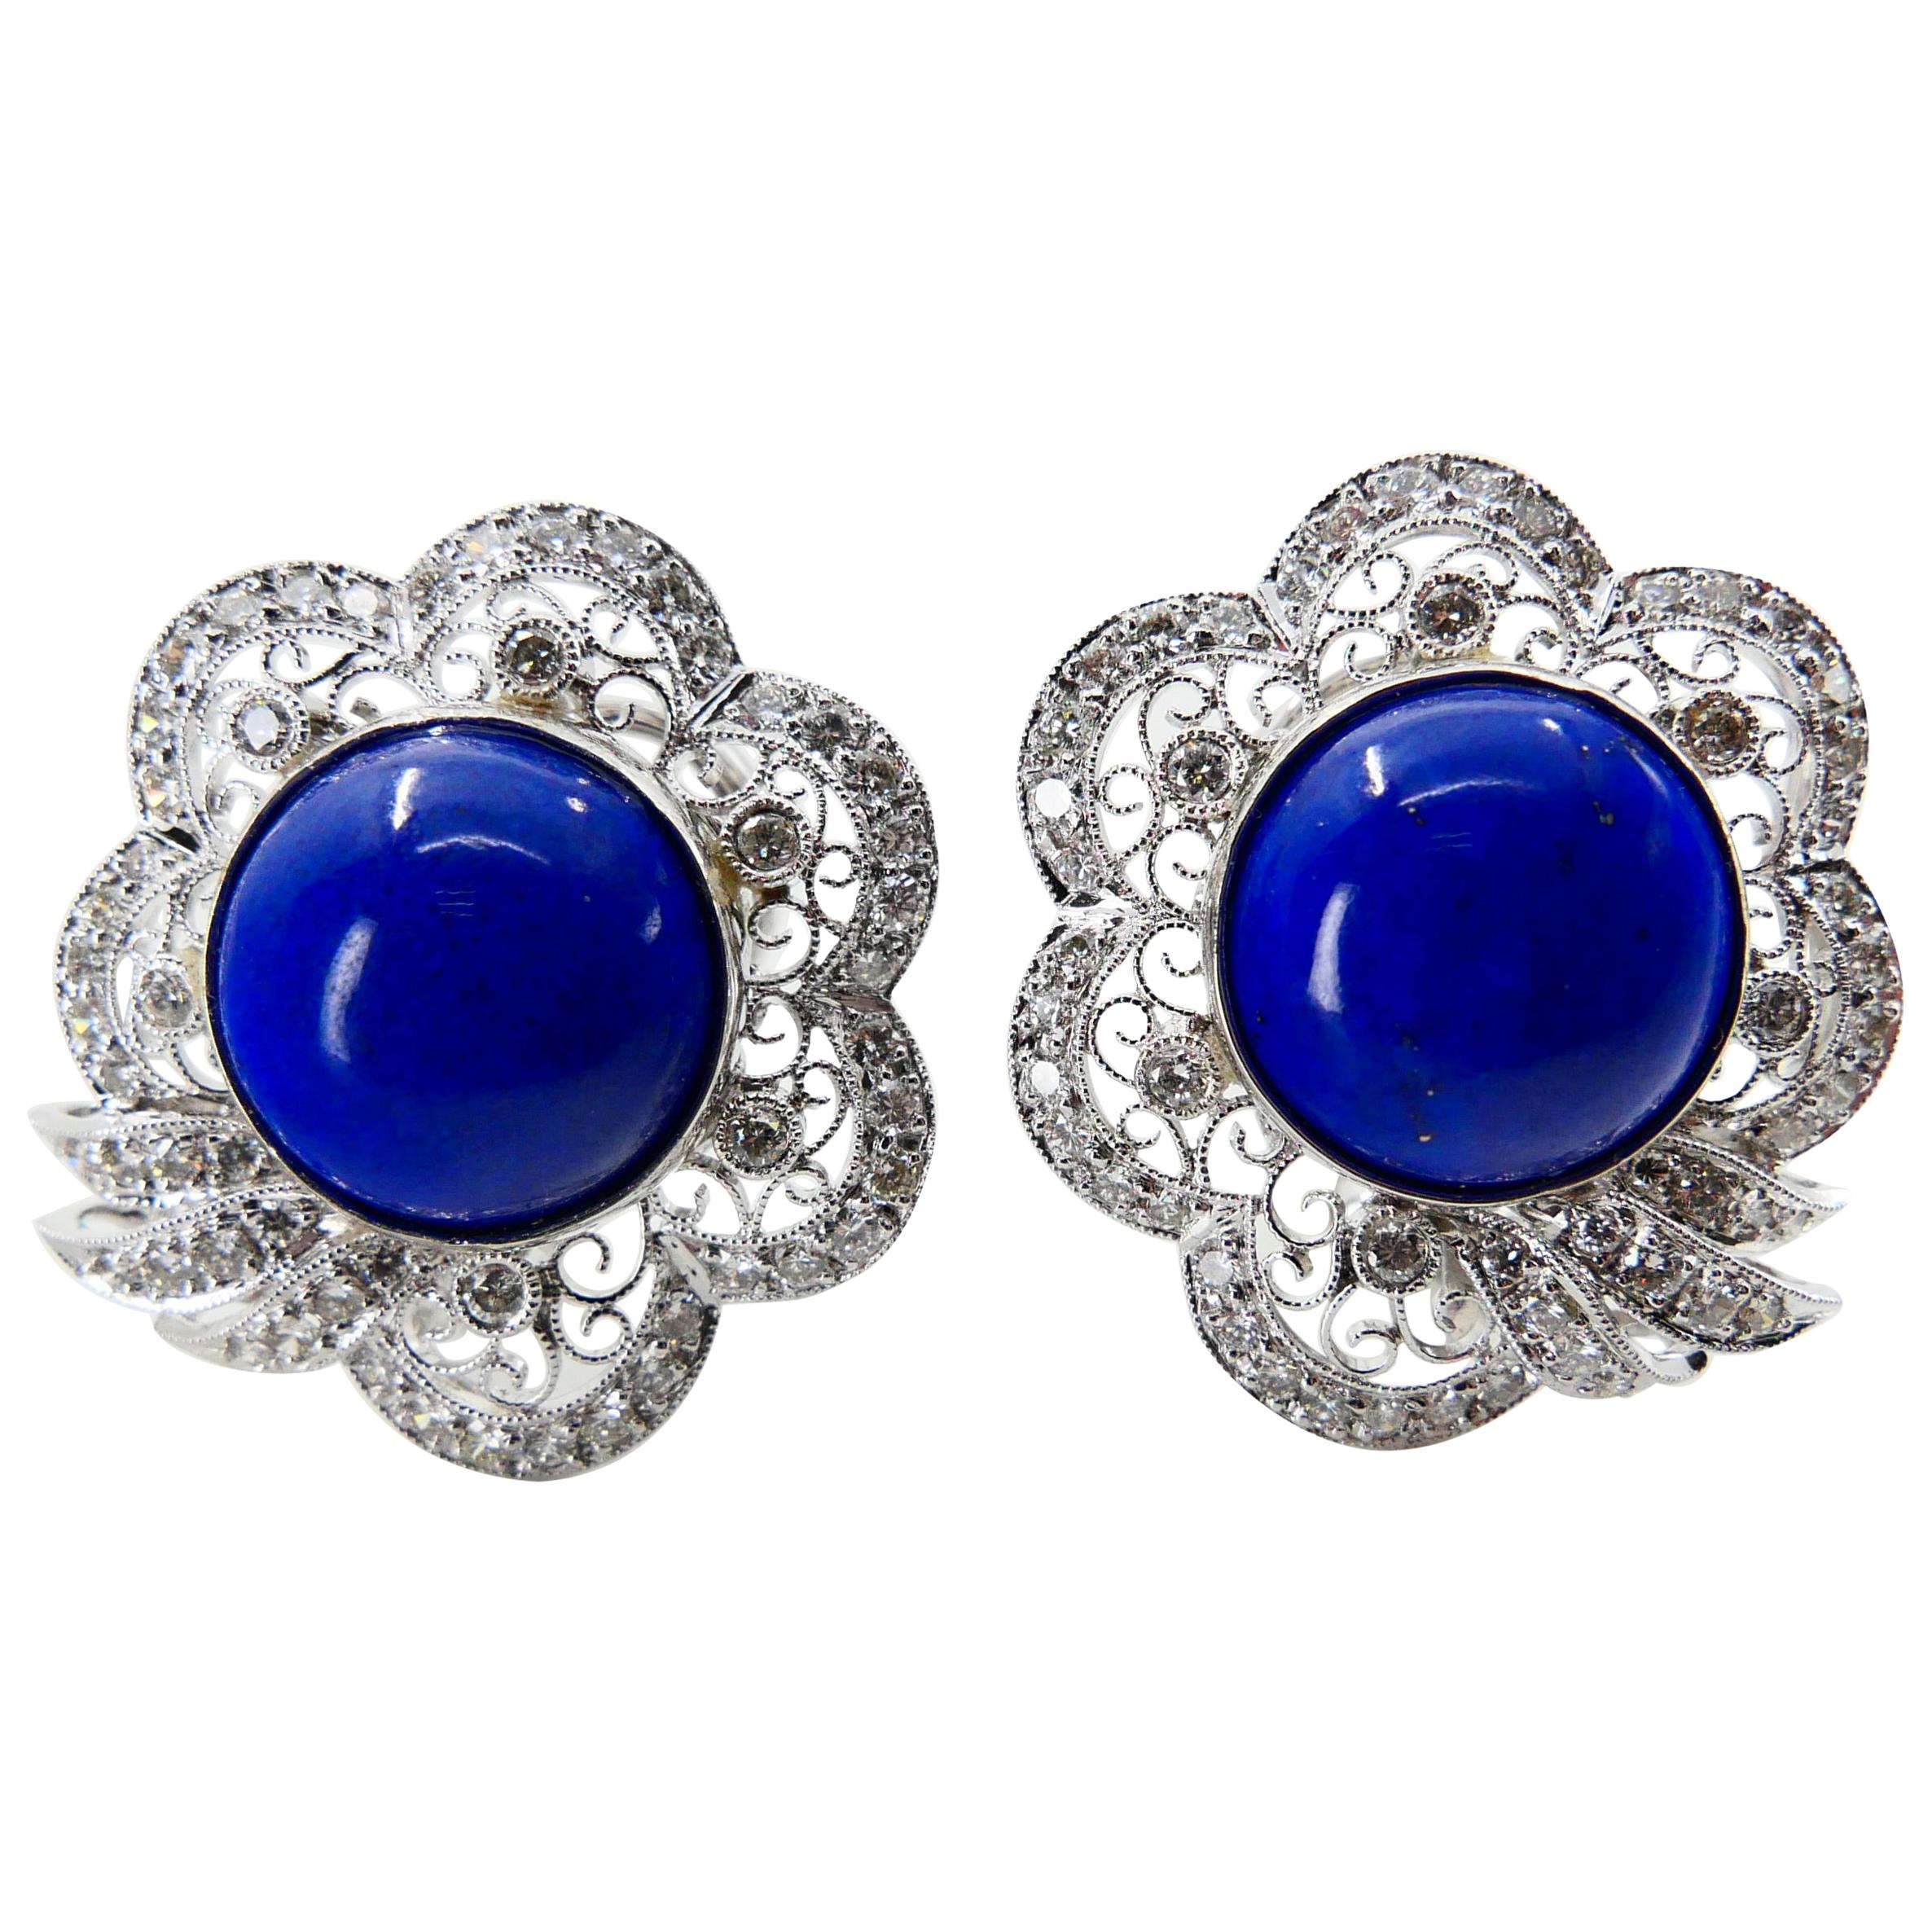 Royal Blue Lapis Lazuli And Diamond Earrings With Natural Gold Veins & Spots